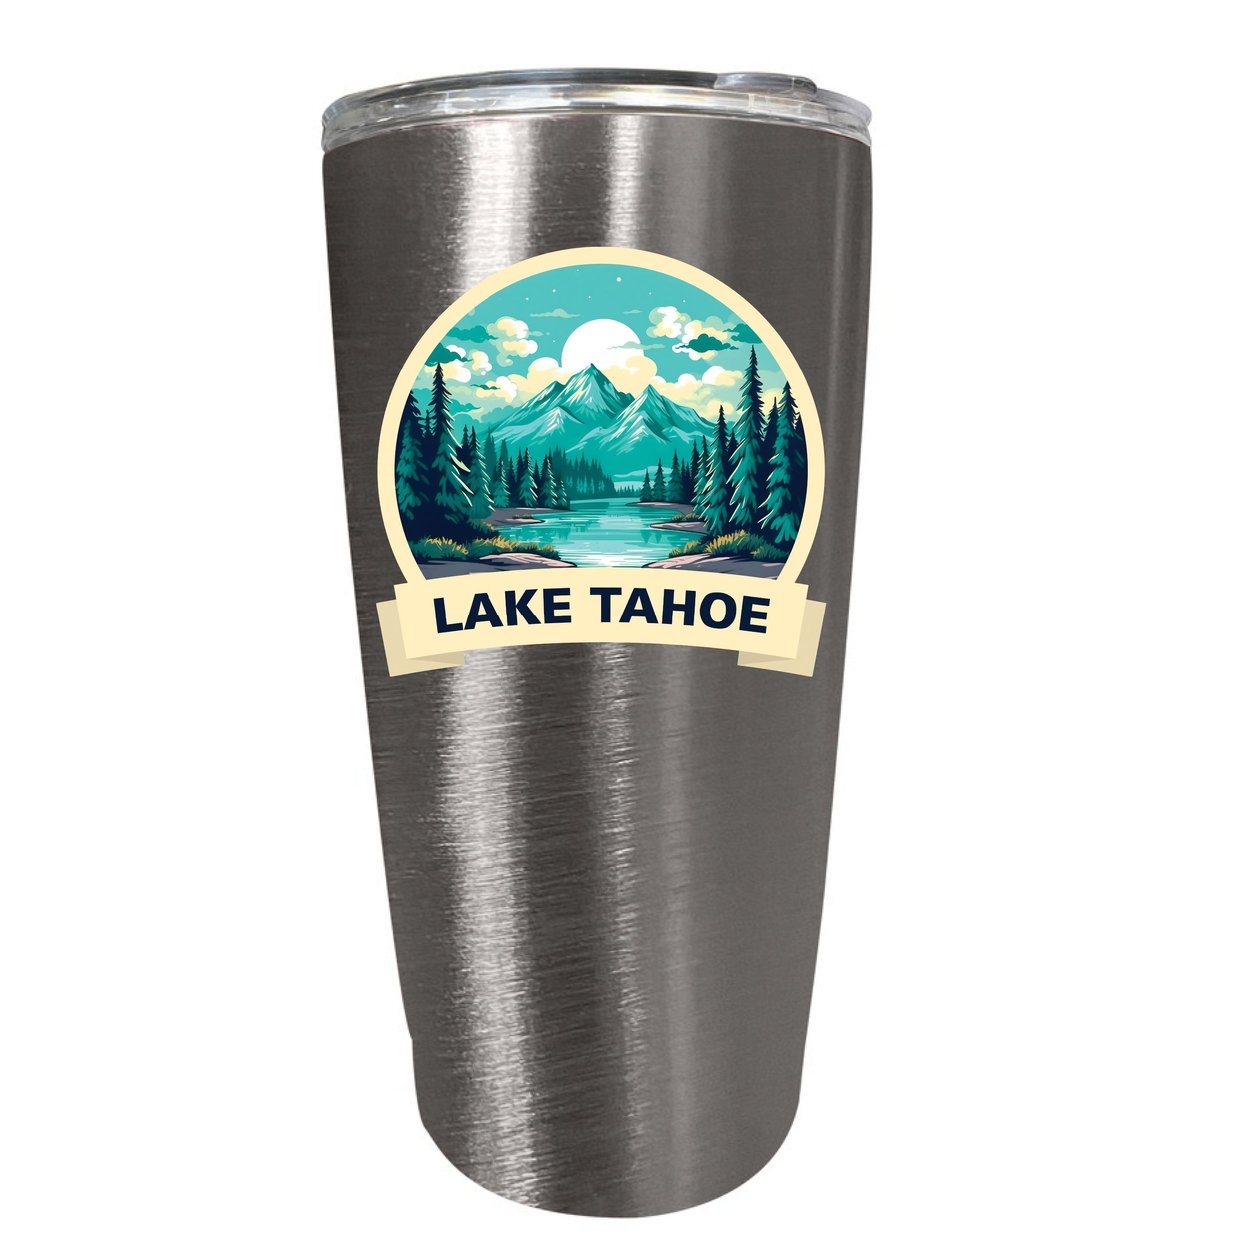 Lake Tahoe California Souvenir 16 Oz Stainless Steel Insulated Tumbler - Navy,,4-Pack